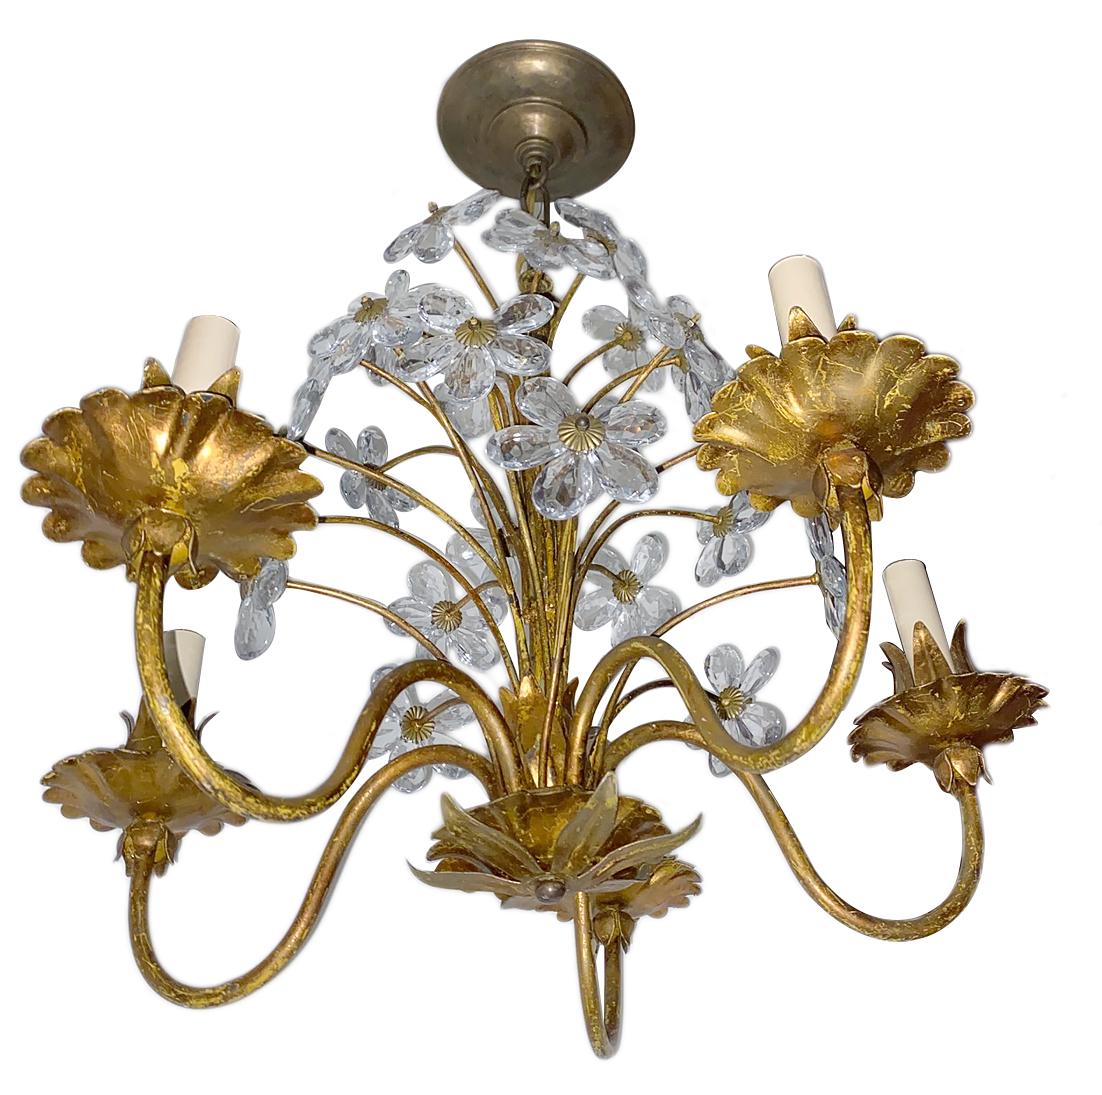 A circa 1930s French gilt metal crystal flower chandelier.
Measurements:
Height 21